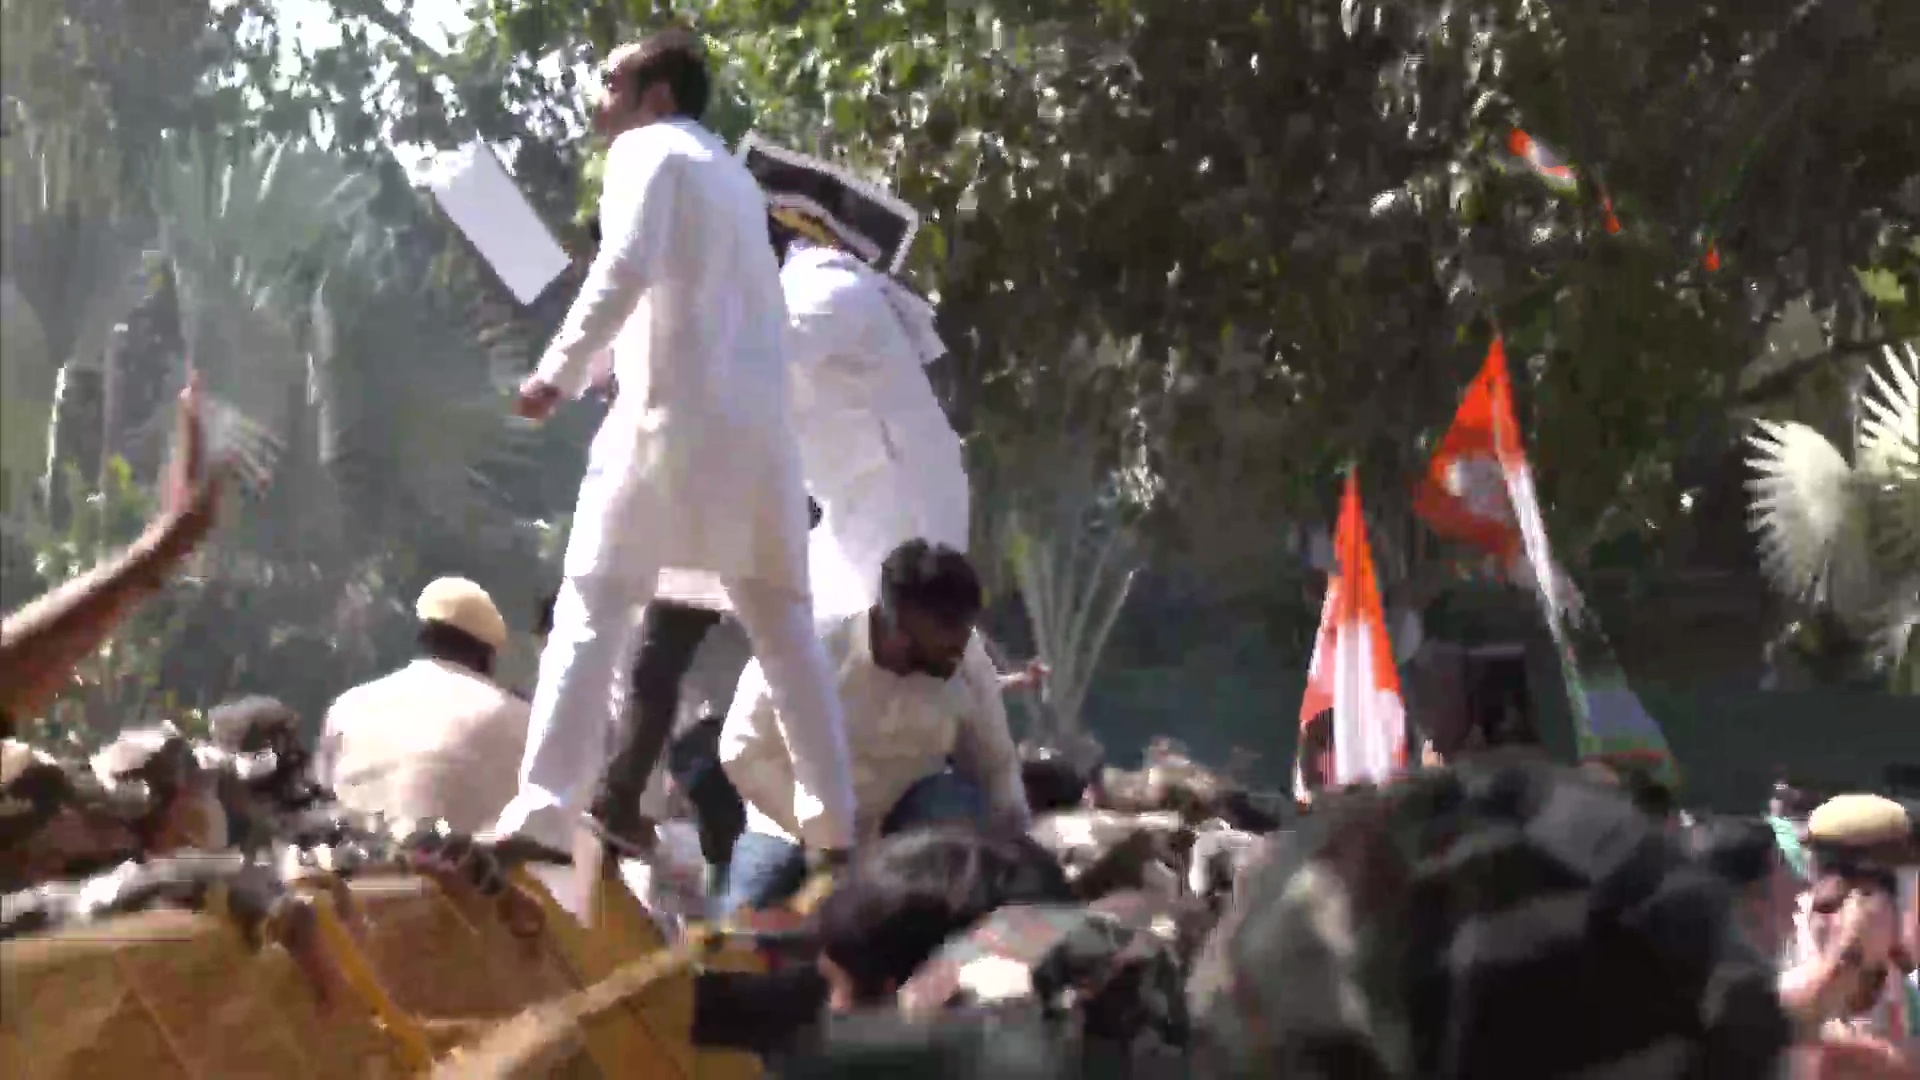 Workers of the Indian Youth Congress staged a protest in Delhi over Lakhimpur Kheri violence